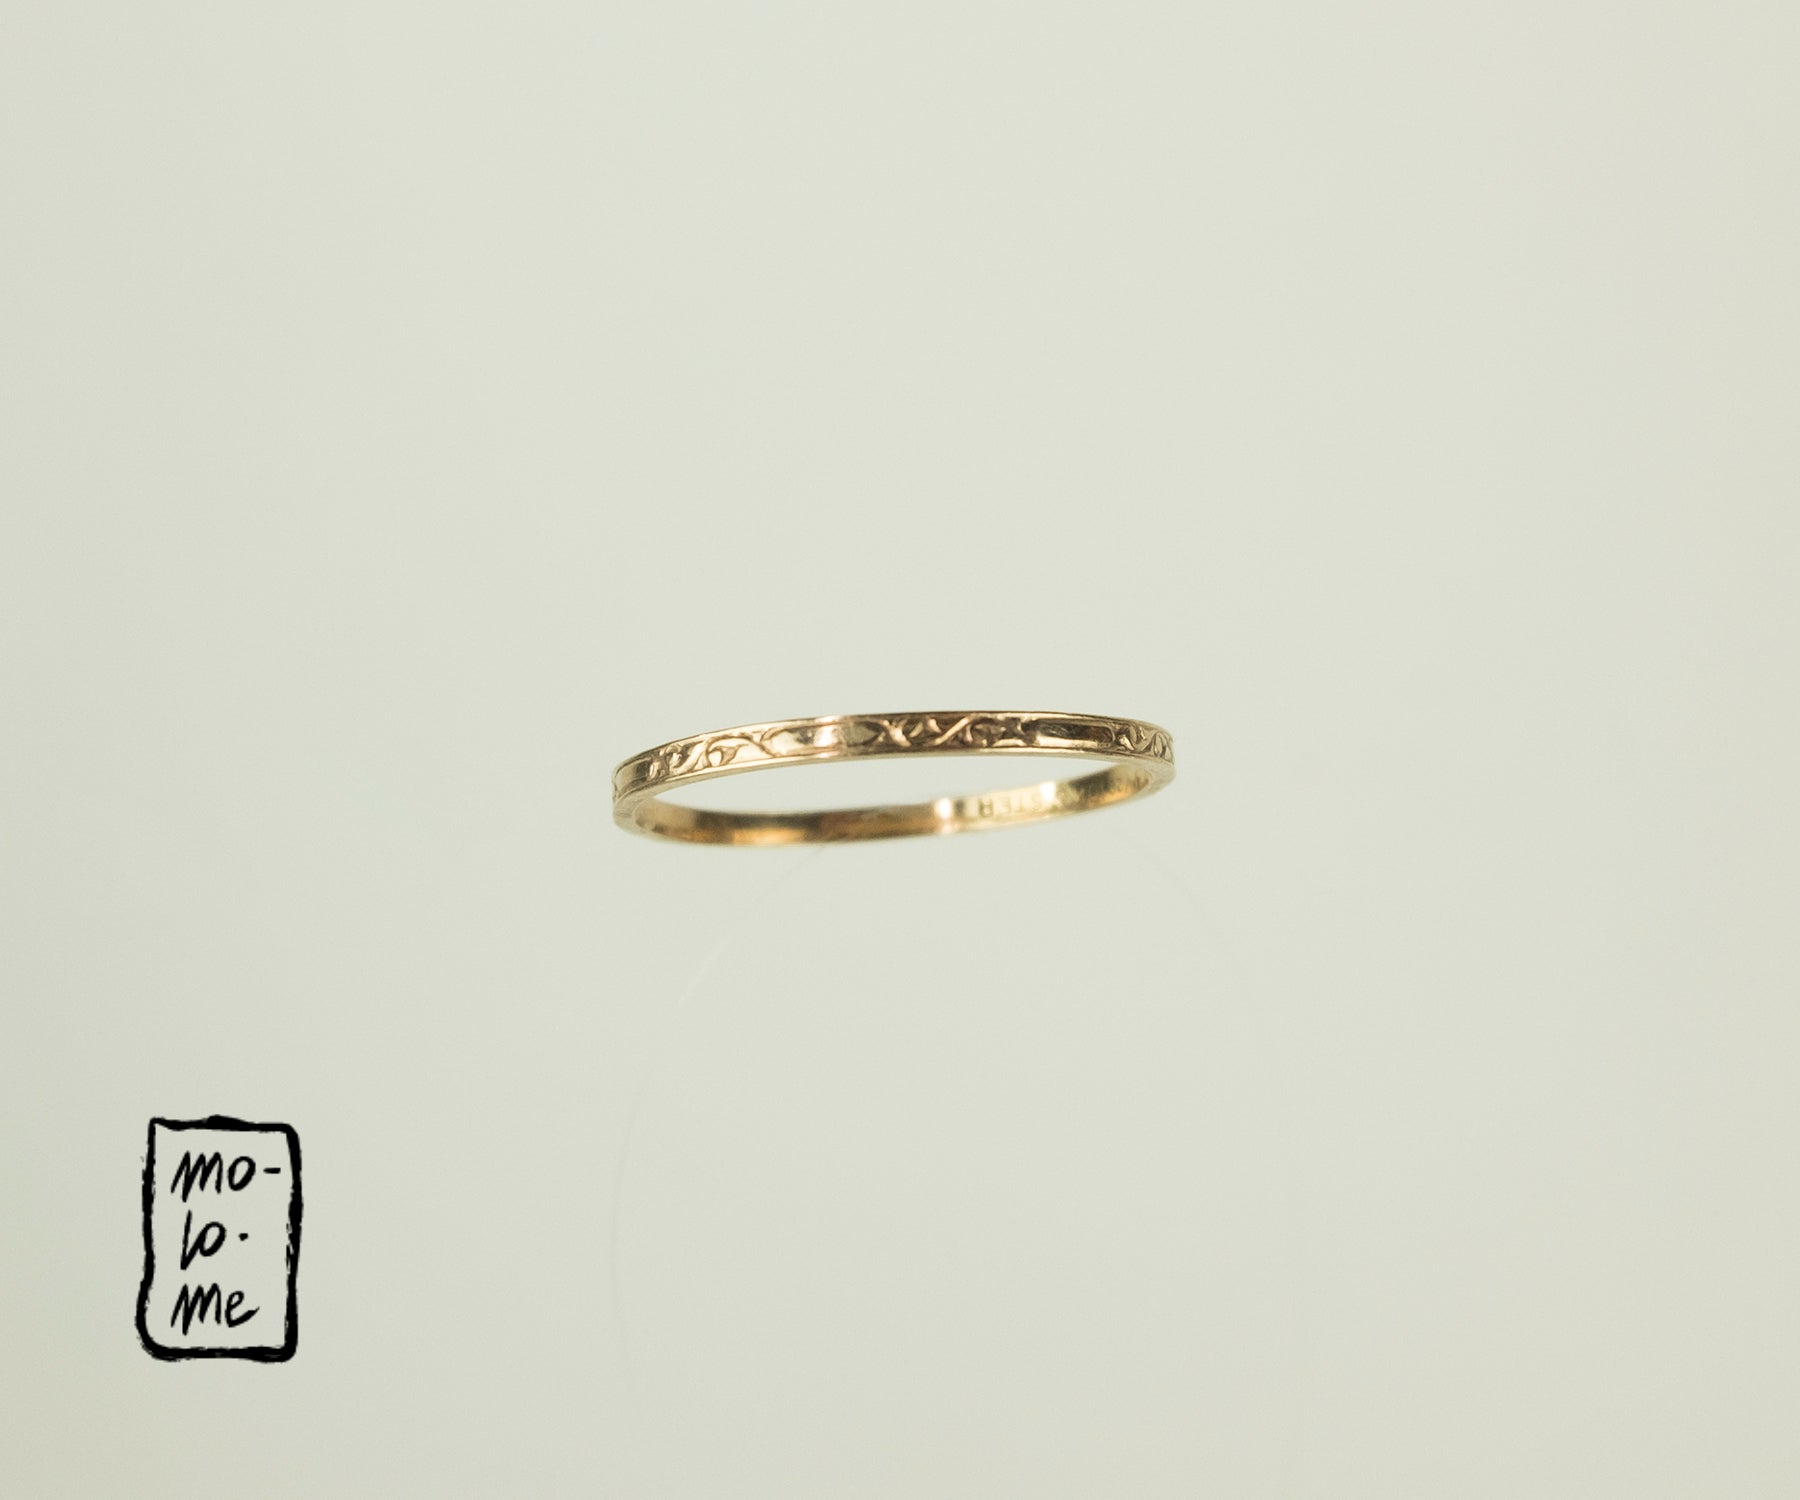 Vintage Skinny Engraved Gold-Plated Stacking Rings by Molo Me angle view